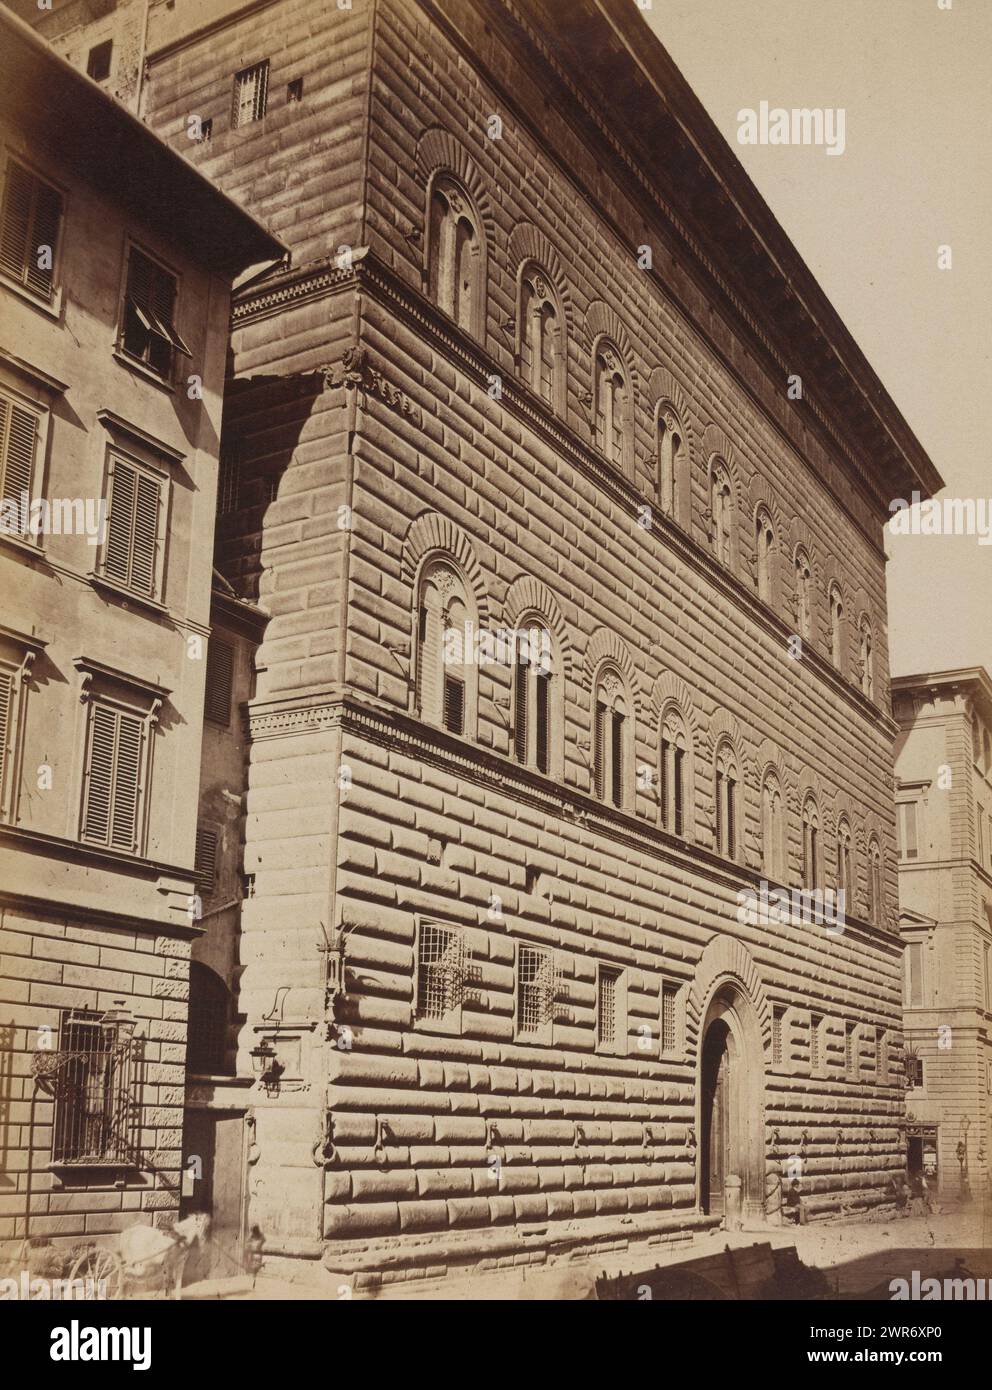 Façade of the Palazzo Strozzi in Florence, Palazzo Strozzi Firenze (title on object), anonymous, Florence, 1851 - c. 1900, paper, albumen print, height 237 mm × width 184 mm, height 264 mm × width 191 mm, photograph Stock Photo